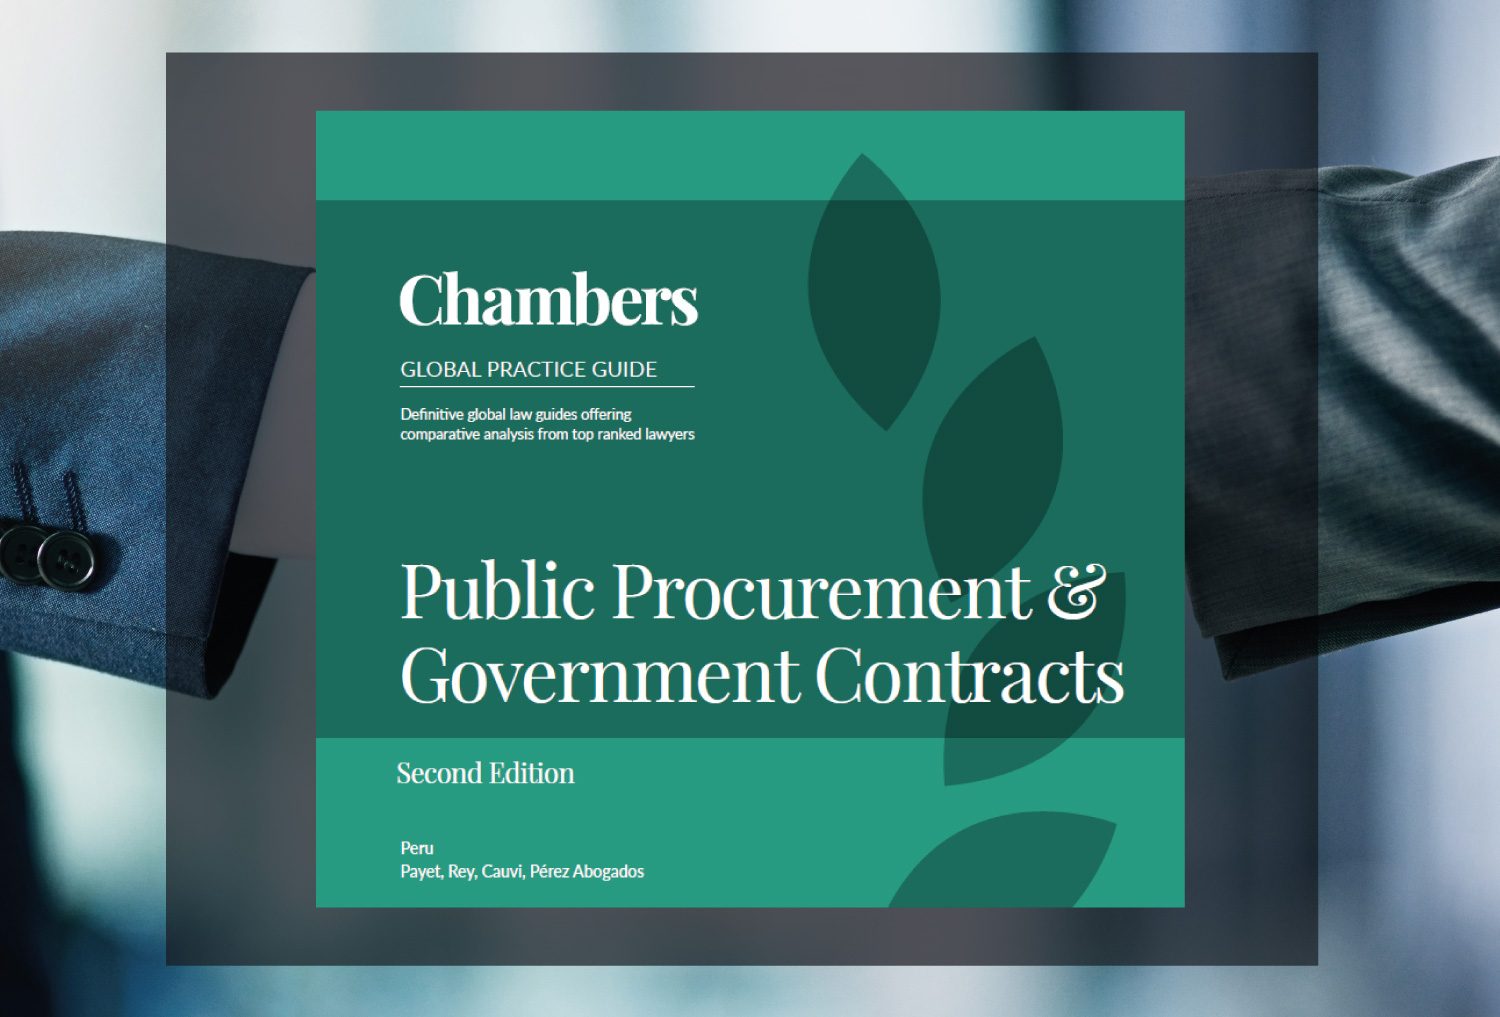 Gerardo Soto and Karen Ángeles collaborated on the Chambers Global Practice Guide 2019: “Public Procurement & Government Contracts”